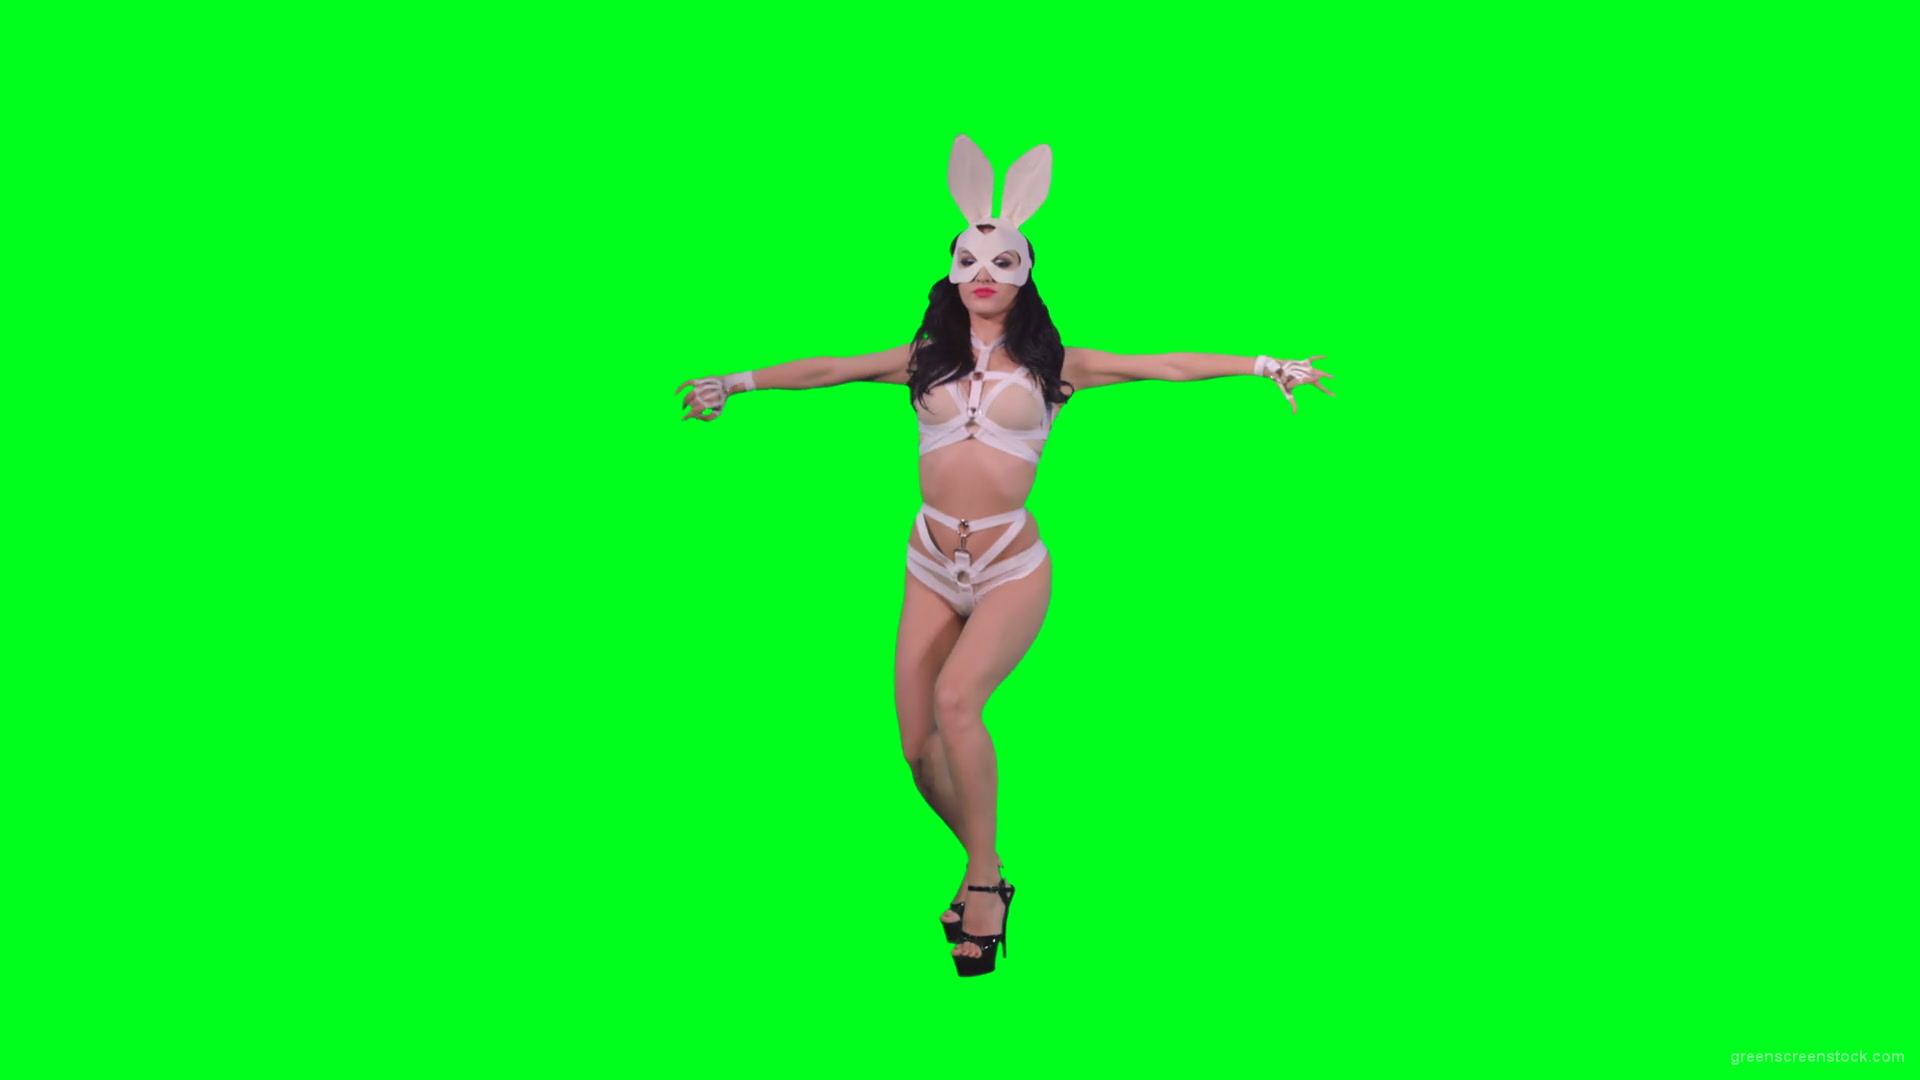 Black-hair-sexy-girl-in-playboy-costume-dancing-go-go-on-green-screen-4K-Video-Footage-1920_009 Green Screen Stock